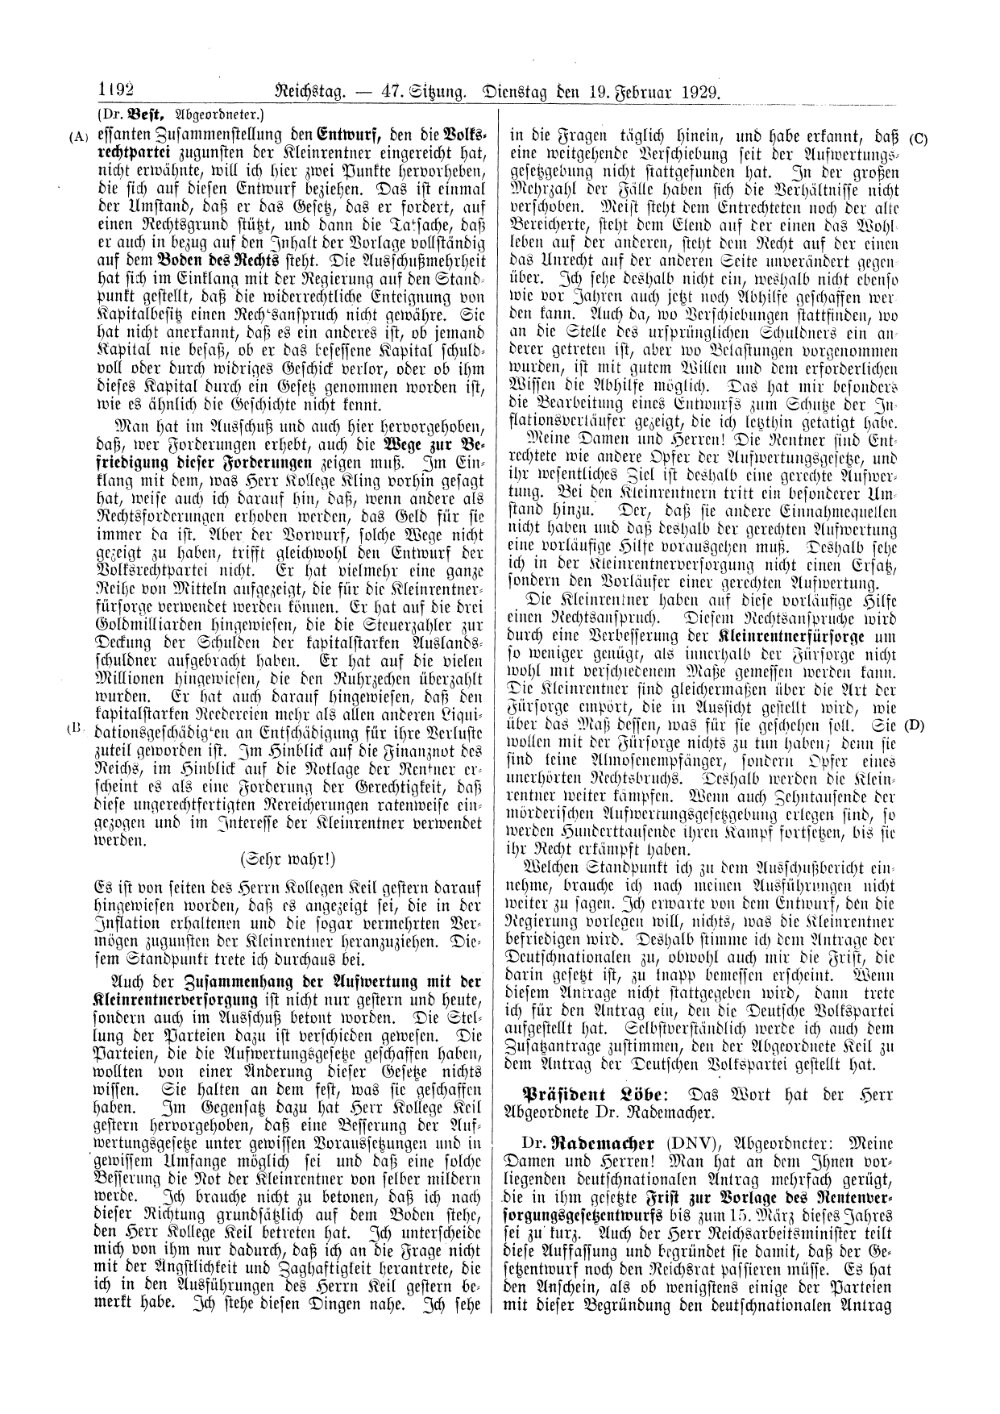 Scan of page 1192